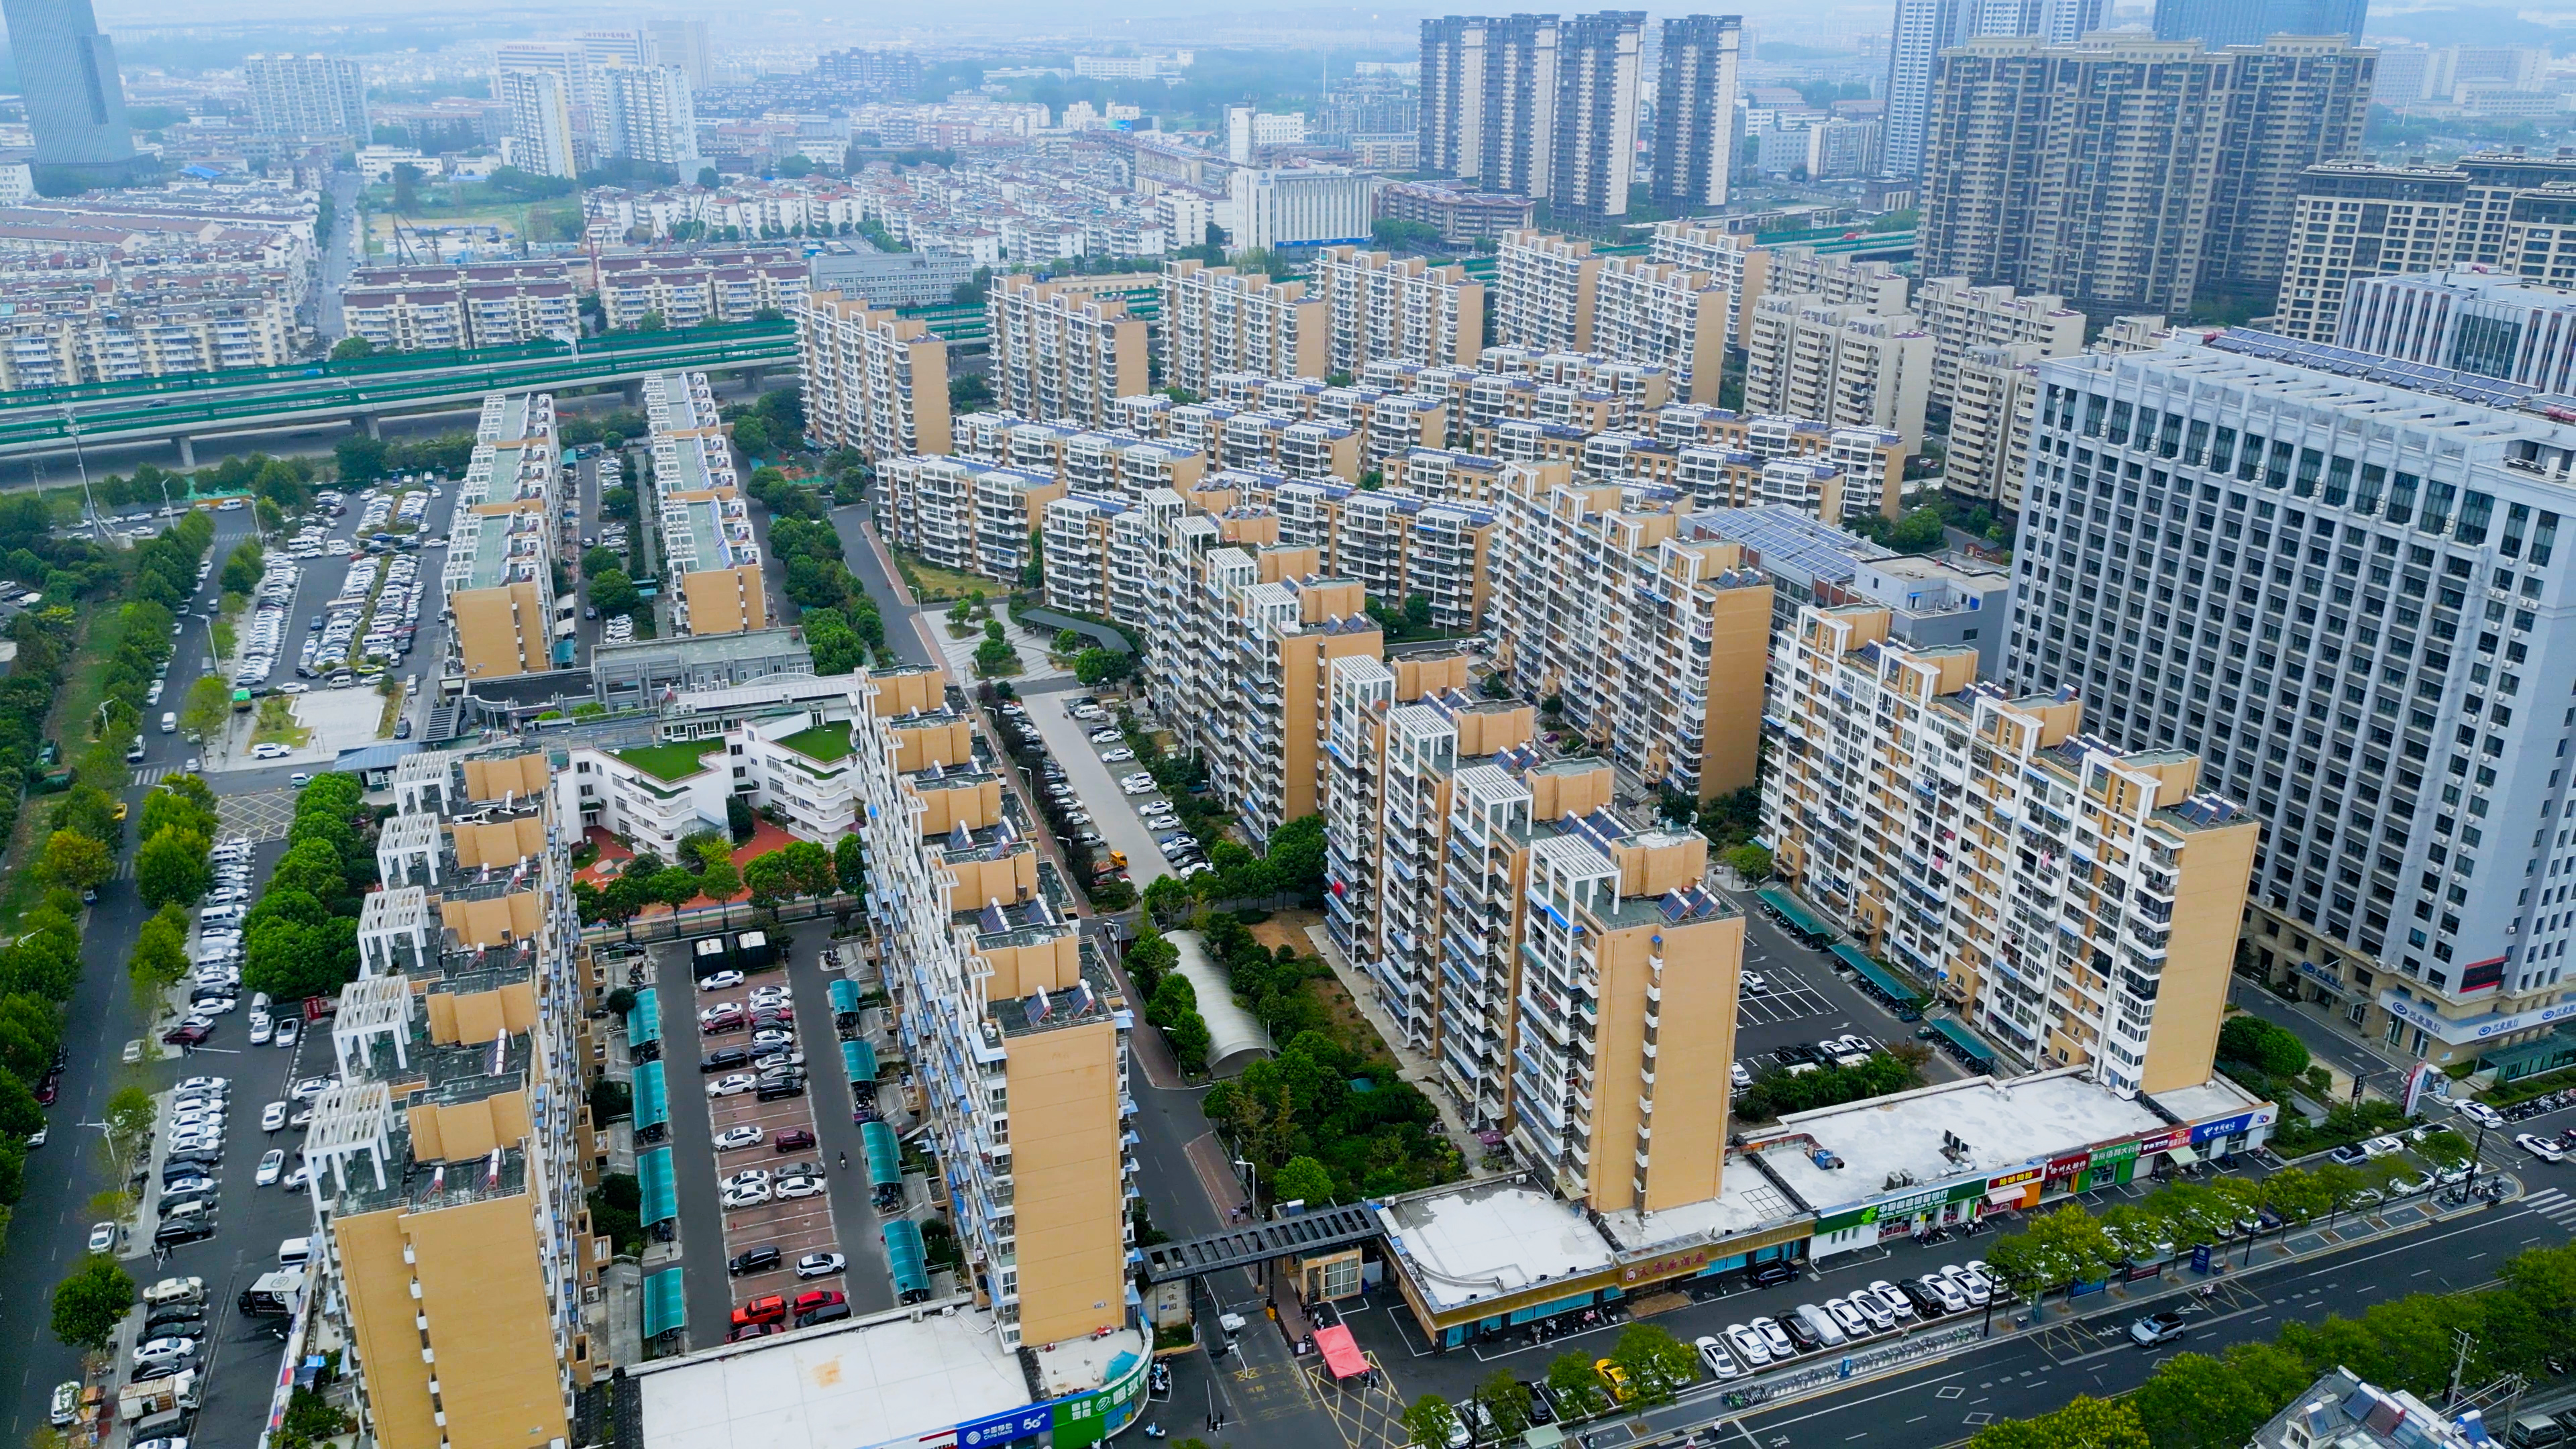 Nanjing Pukou District actively builds smart communities, benefiting thousands of households